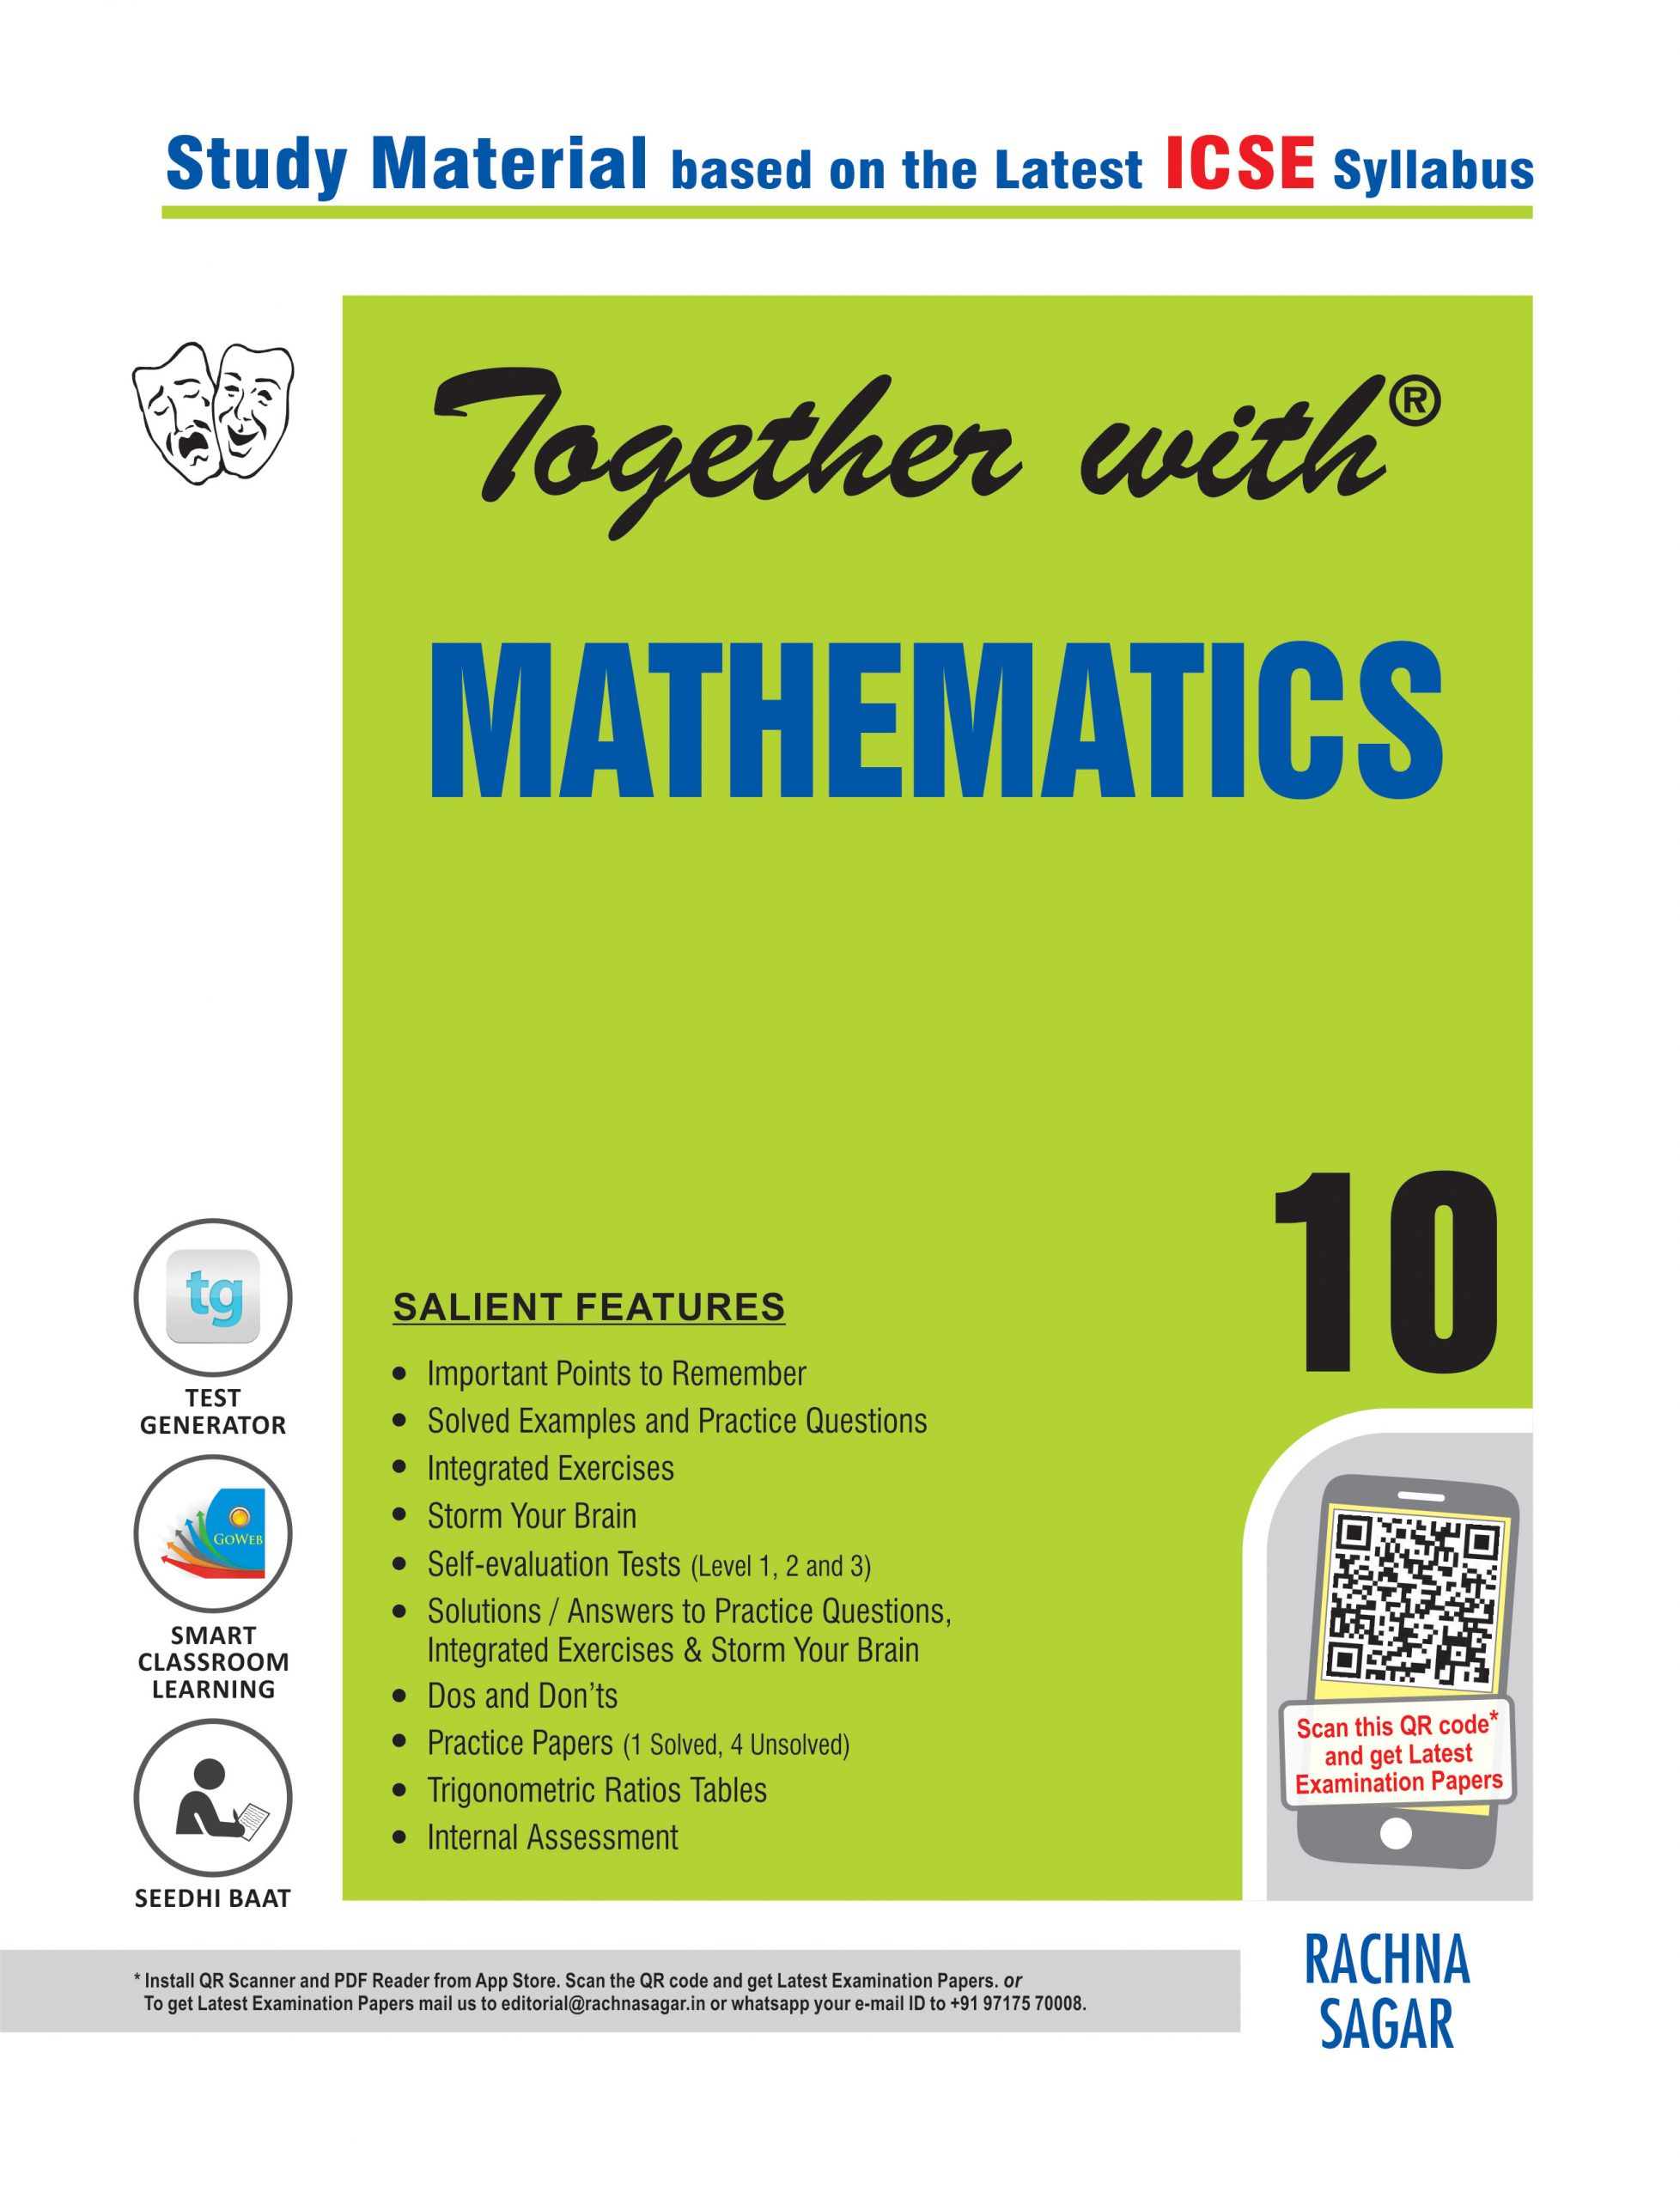 UPDATED TOGETHER WITH ICSE BOARD MATHEMATICS BOOK FOR CLASS 10 RELEASED TODAY